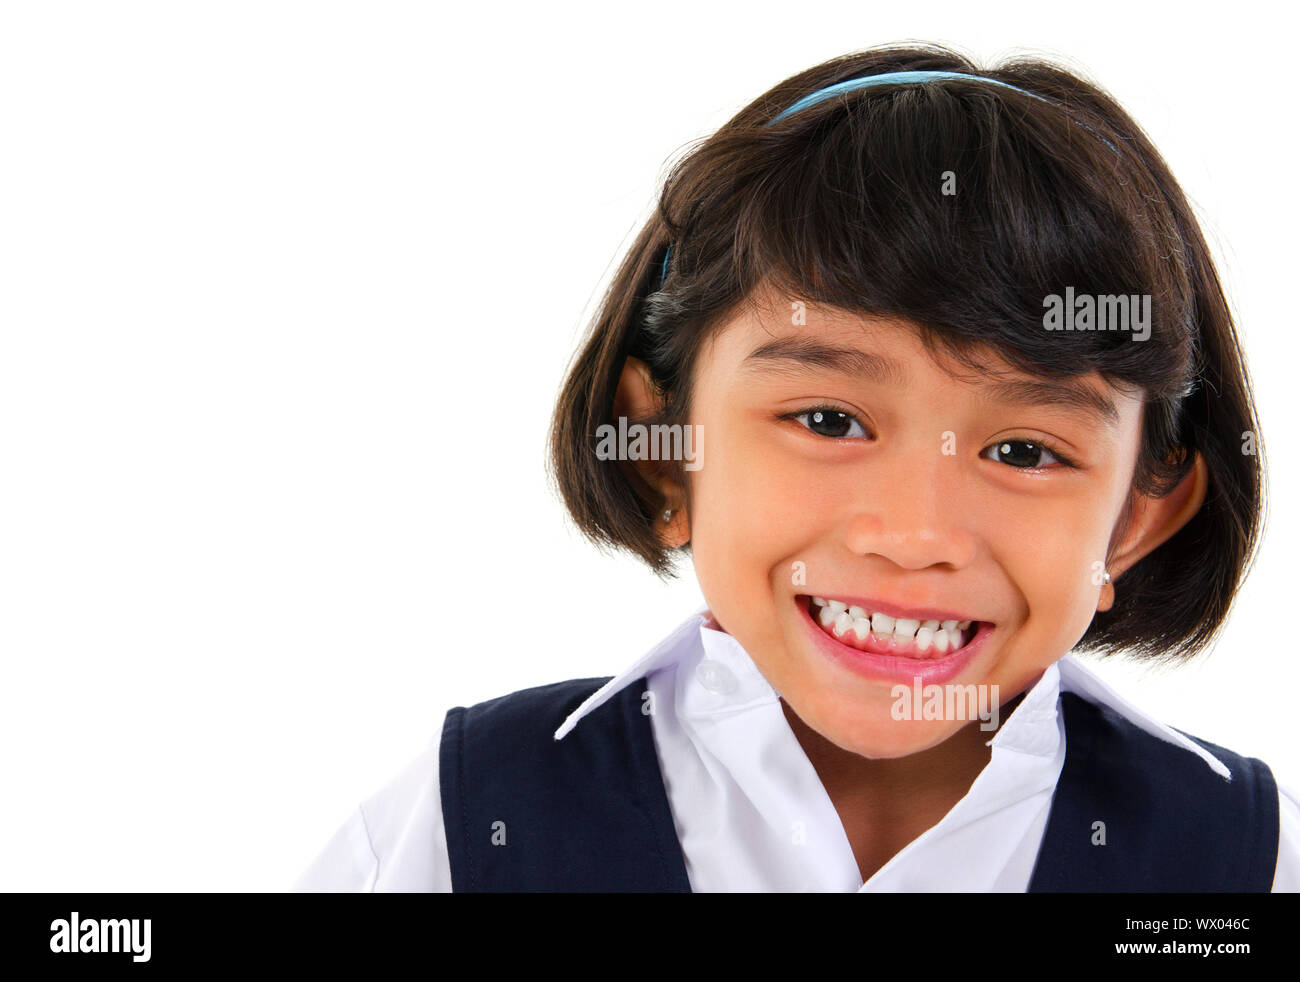 Head shot portrait of Southeast Asian primary school student over white background Stock Photo